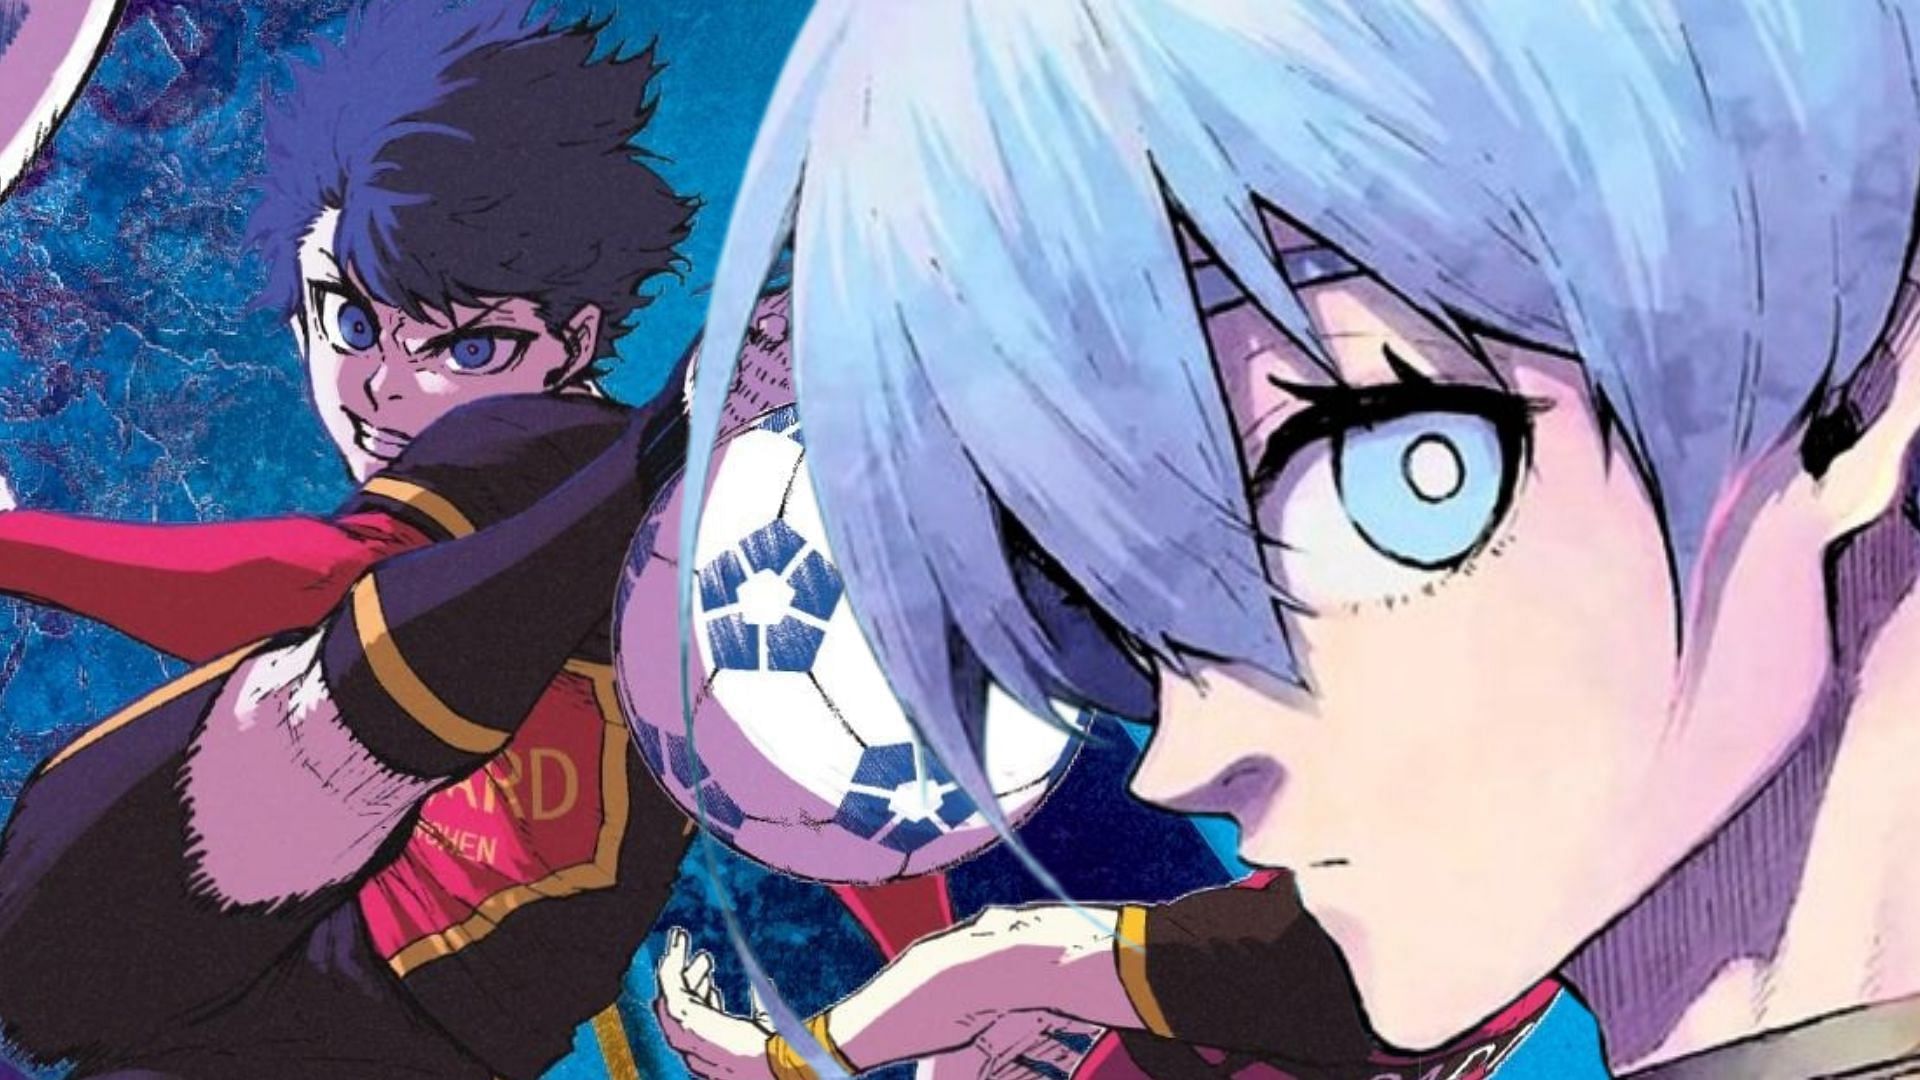 Blue Lock chapter 237: Exact release date and time, where to read